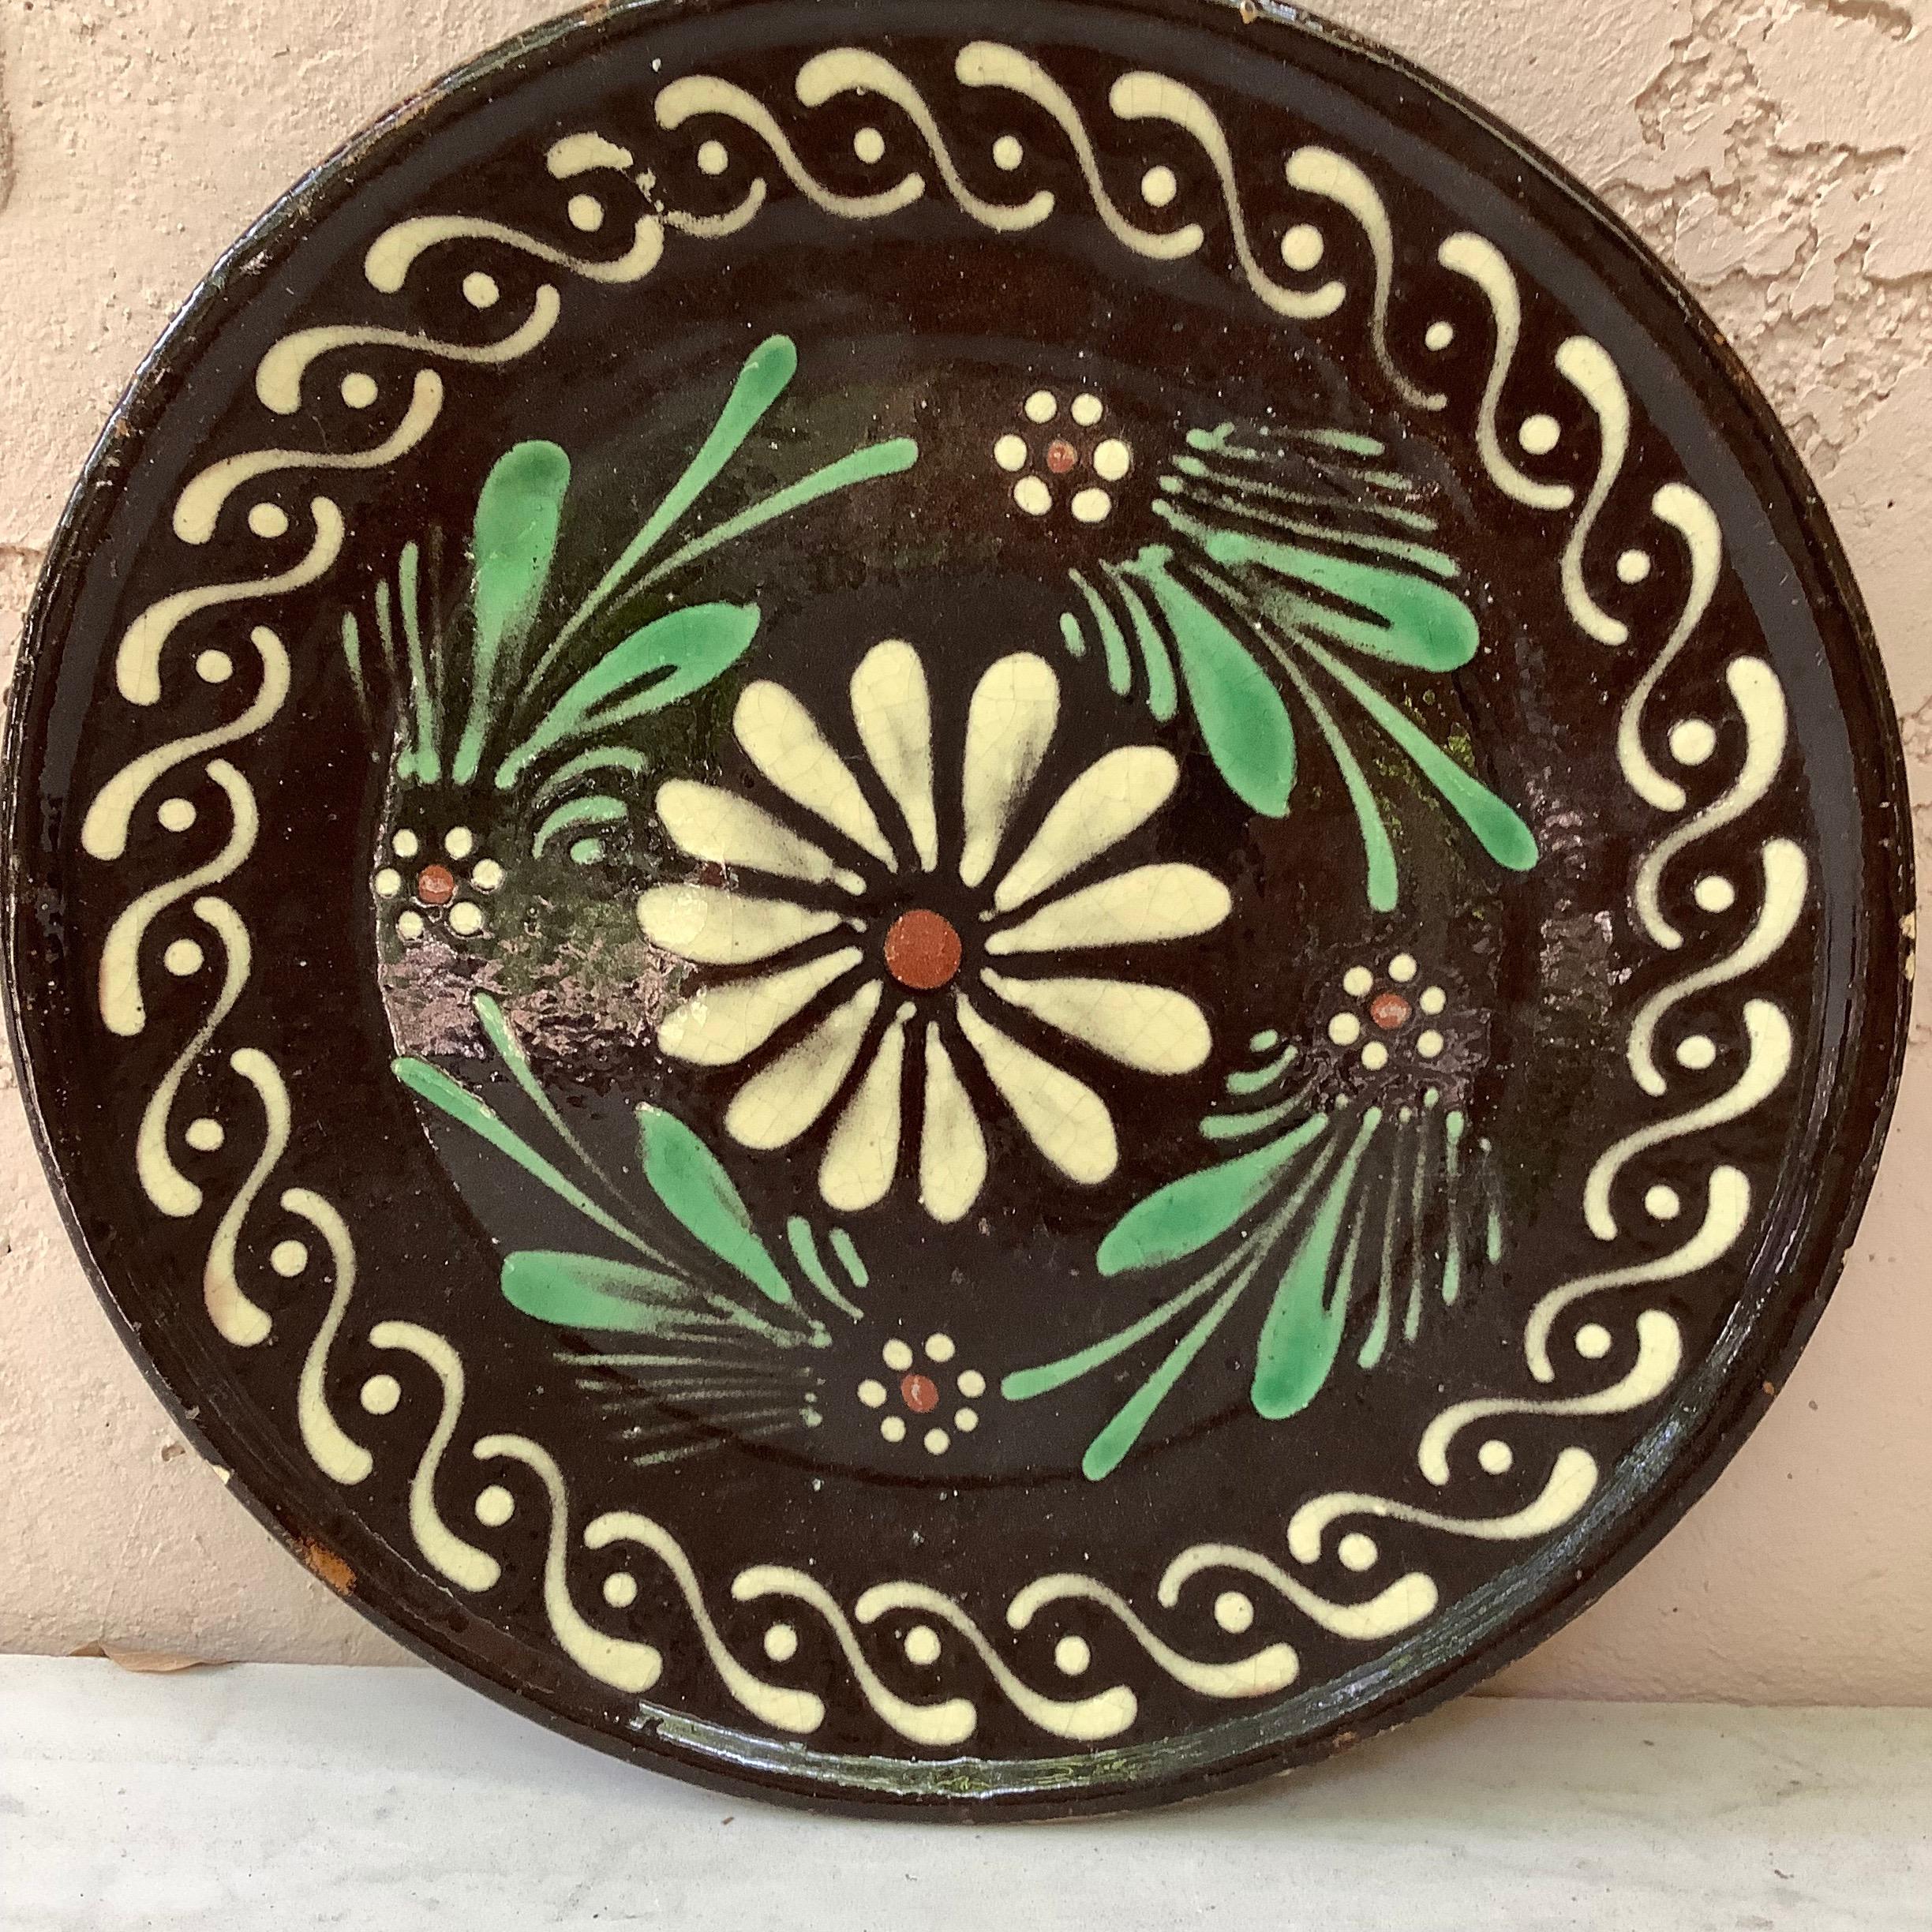 19th French Pottery Savoie floral platter.
Country style.